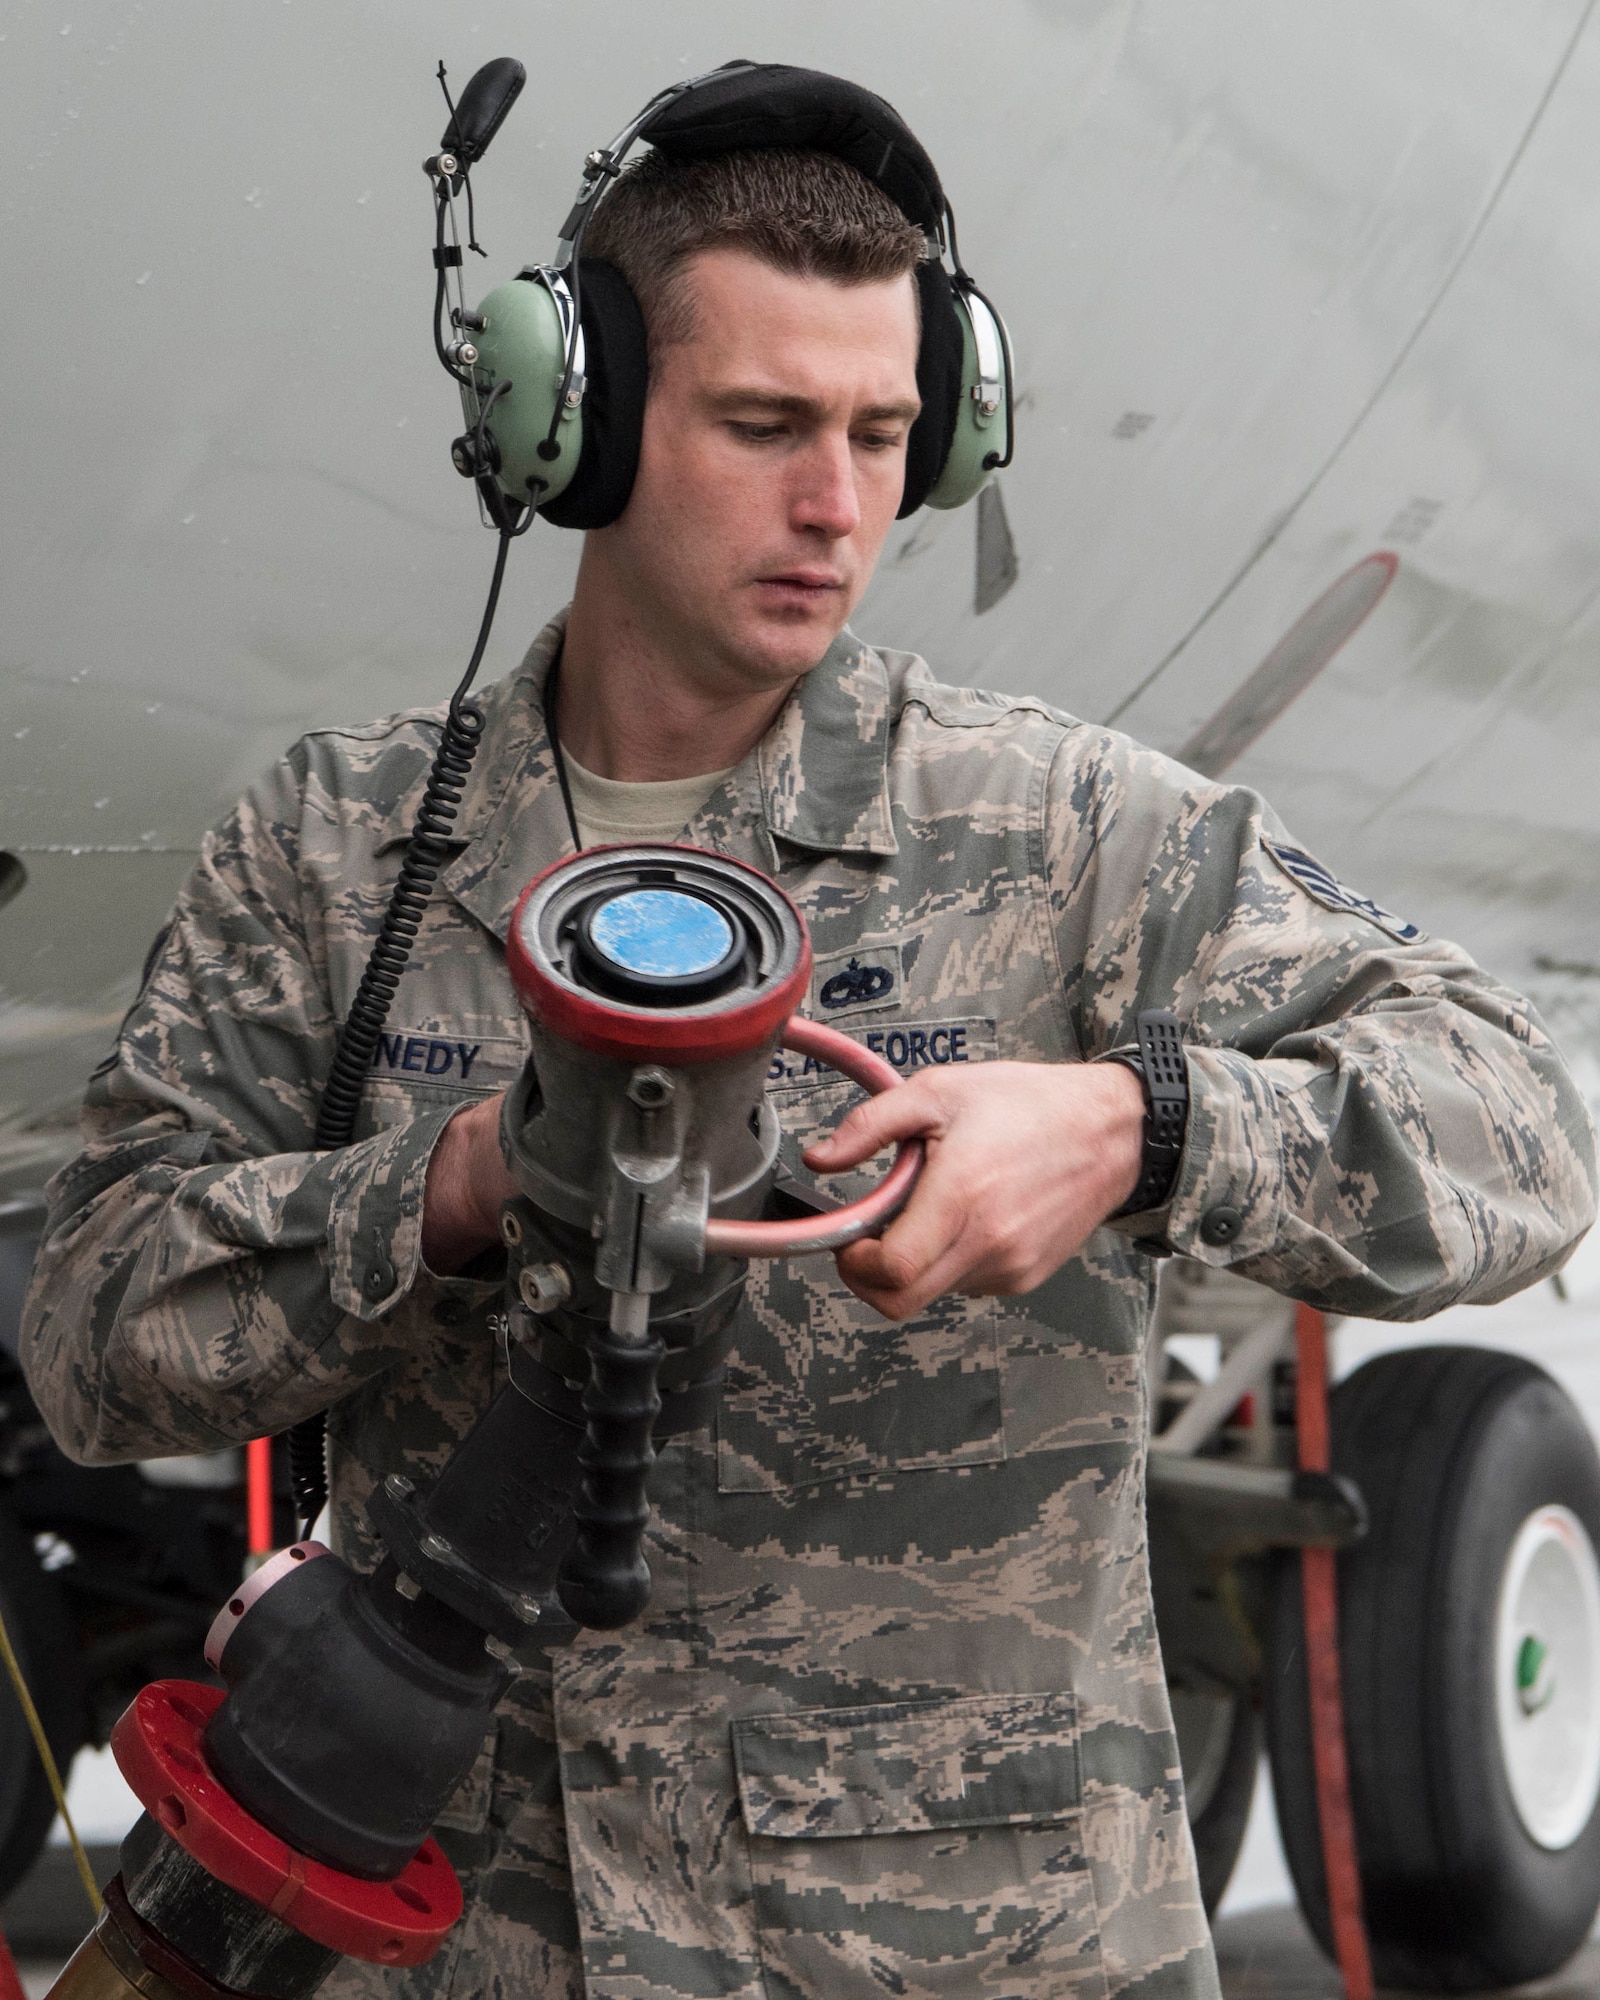 U.S. Air Force Staff Sgt. Matthew Kennedy, a 962nd Aircraft Maintenance Unit E-3 Sentry crew chief, holds a fuel hose at Joint Base Elmendorf-Richardson, Alaska, July 25, 2018. Kennedy is responsible for service and repair on everything coming back from daily inspections, to include things like oil, hydraulics and fueling the jet.